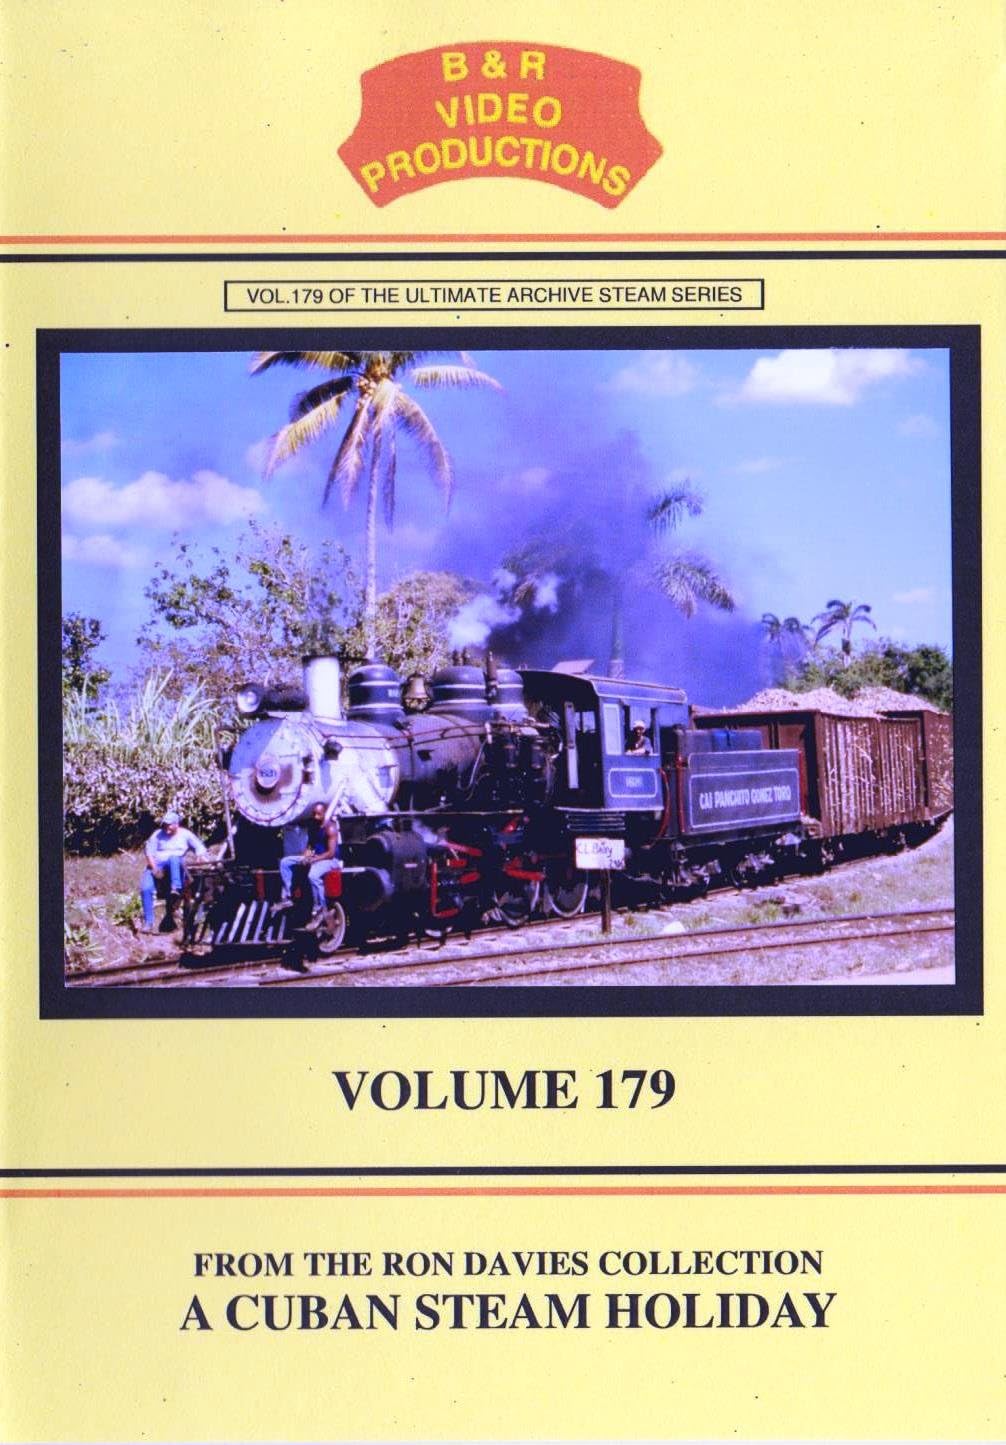 B & R Video Productions Vol 179 - From the Ron Davies collection A Cuban steam holiday 